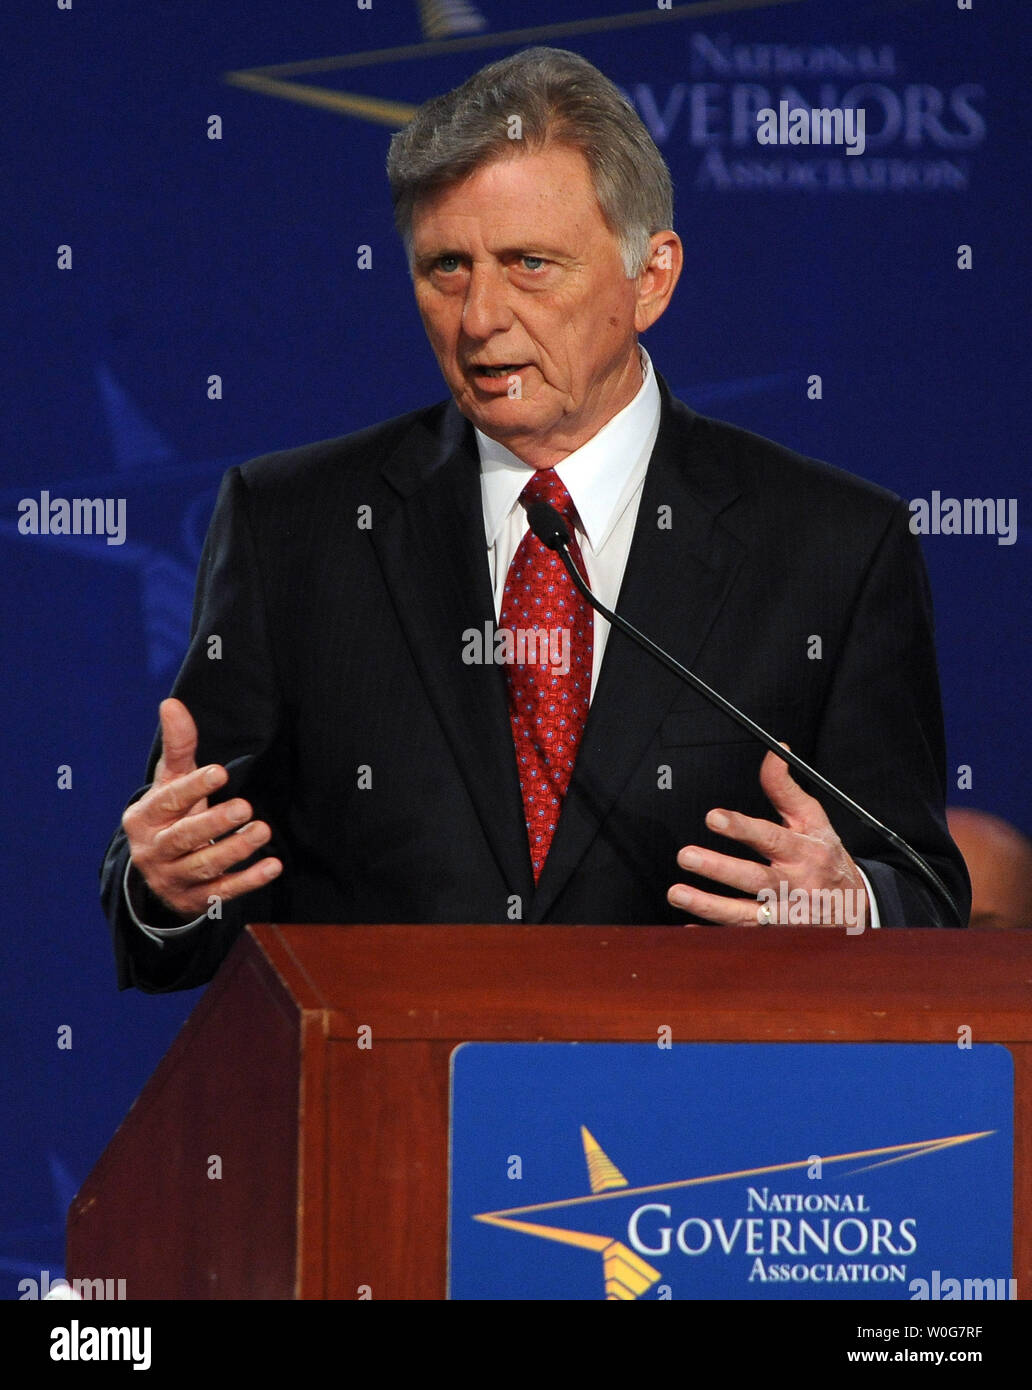 Gov. Mike Beebe, D-AK, speaks during the National Governors Association Winter Meeting in Washington on February 28, 2011. Earlier the Governors met with U.S. President Barack Obama at the White House.   UPI/Roger L. Wollenberg. Stock Photo